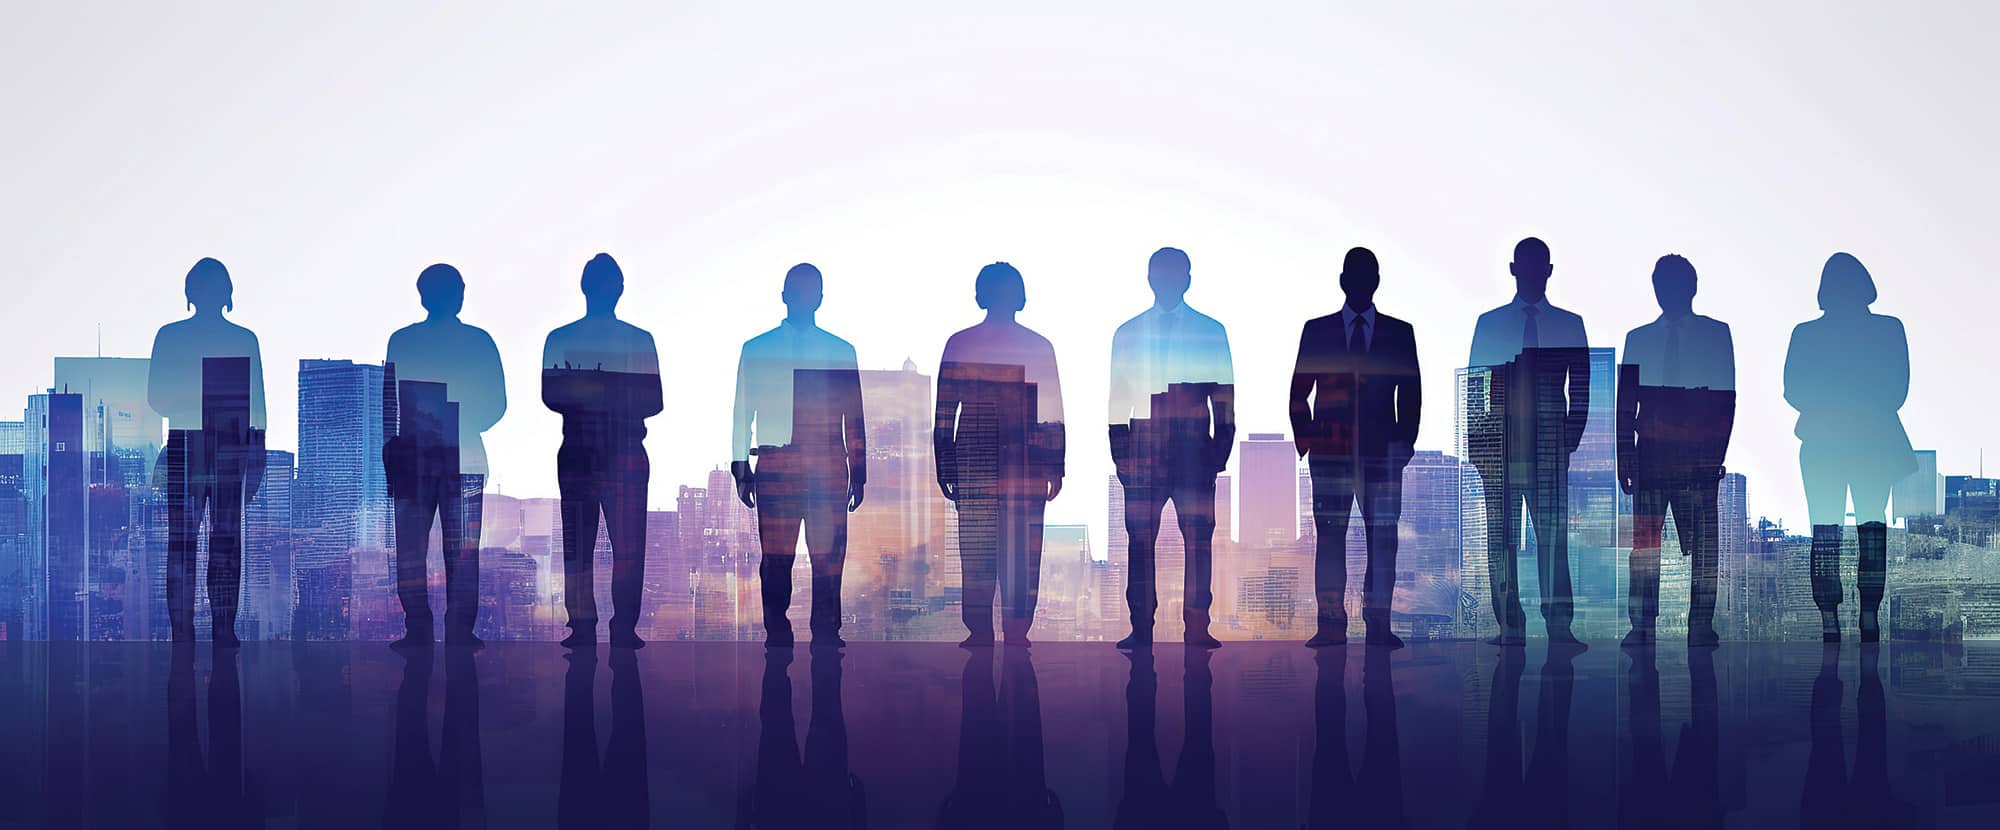 Silhouettes of business people overlayed in front of a city backdrop.